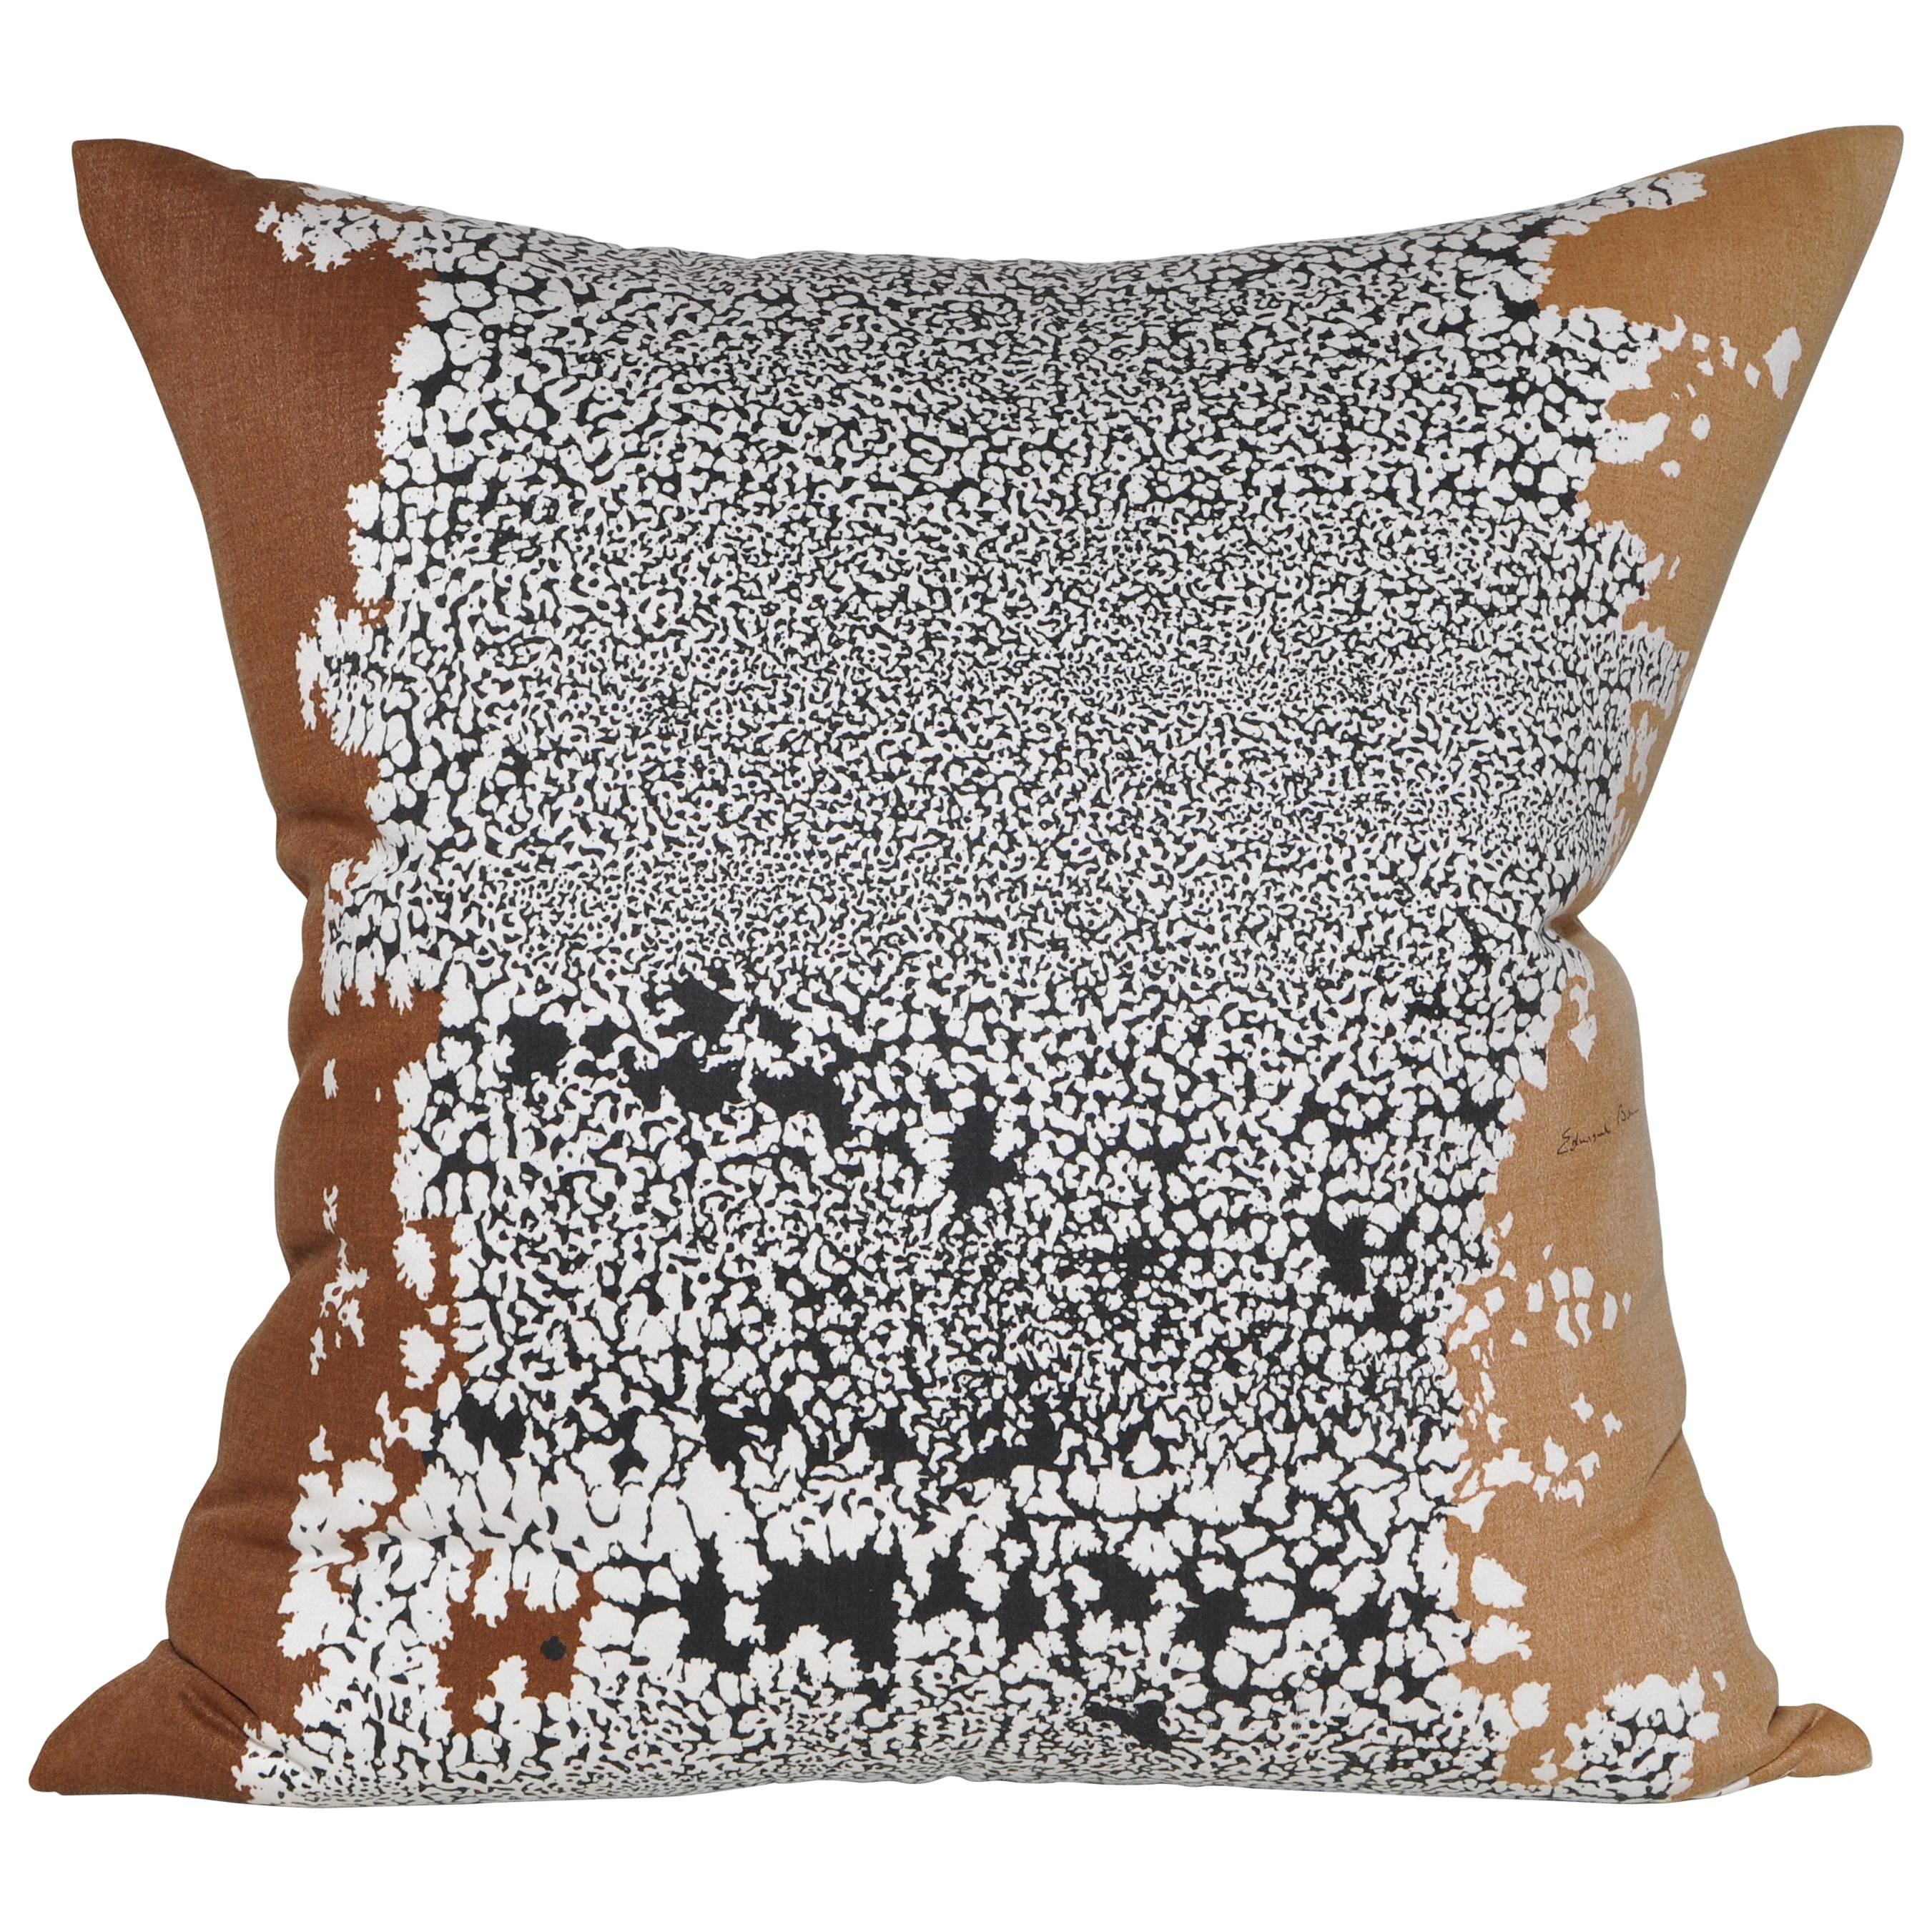 Custom-made large pair of luxury pillows (cushions) created from a rare vintage fabric by midcentury artist Edmund Bacci in an attractive abstract pattern, backed in new pure Irish linen, filled with new duck and down feather insert and a concealed